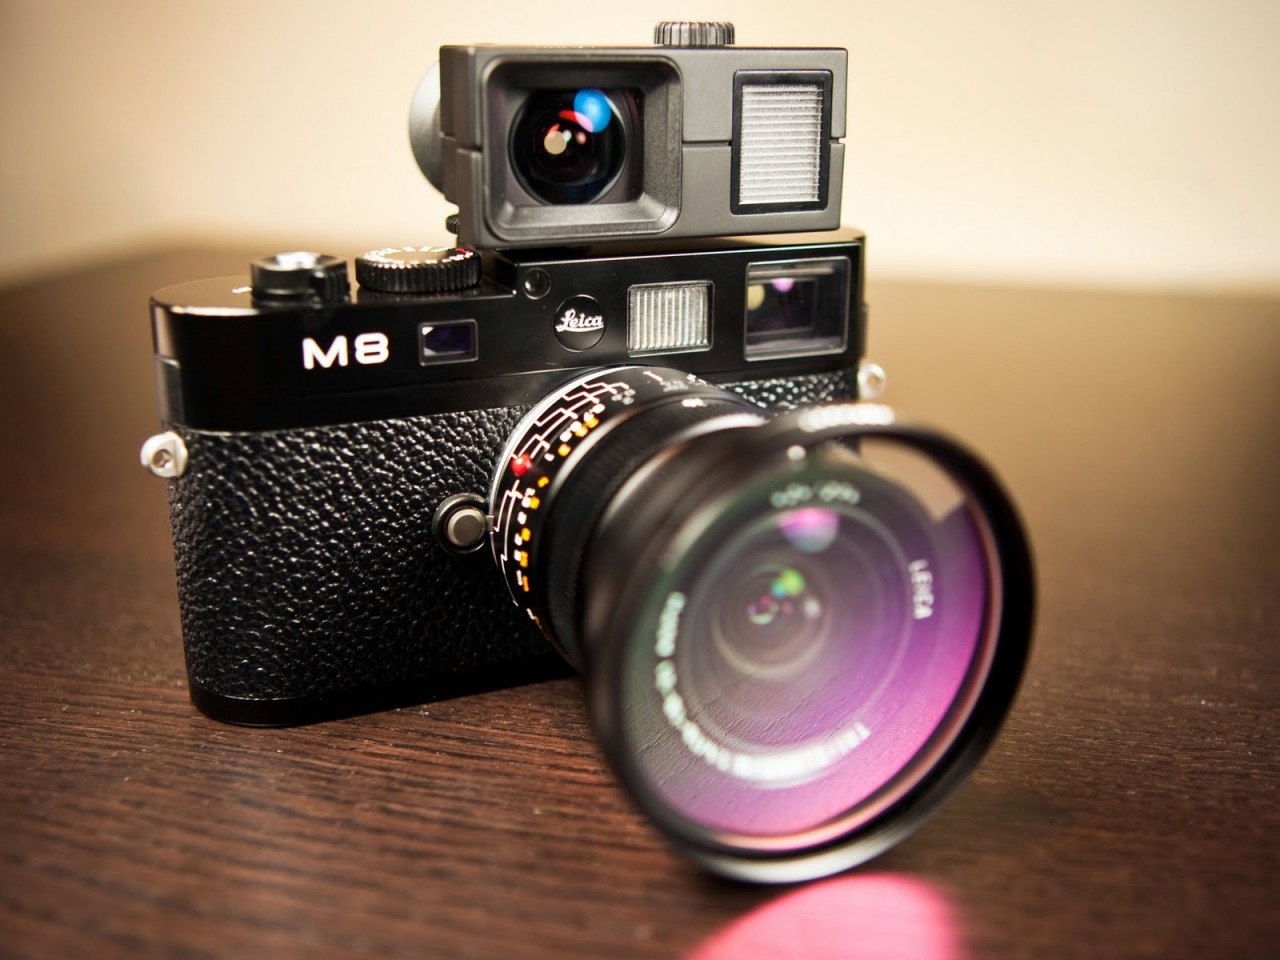 Leica M8 for 1280 x 960 resolution